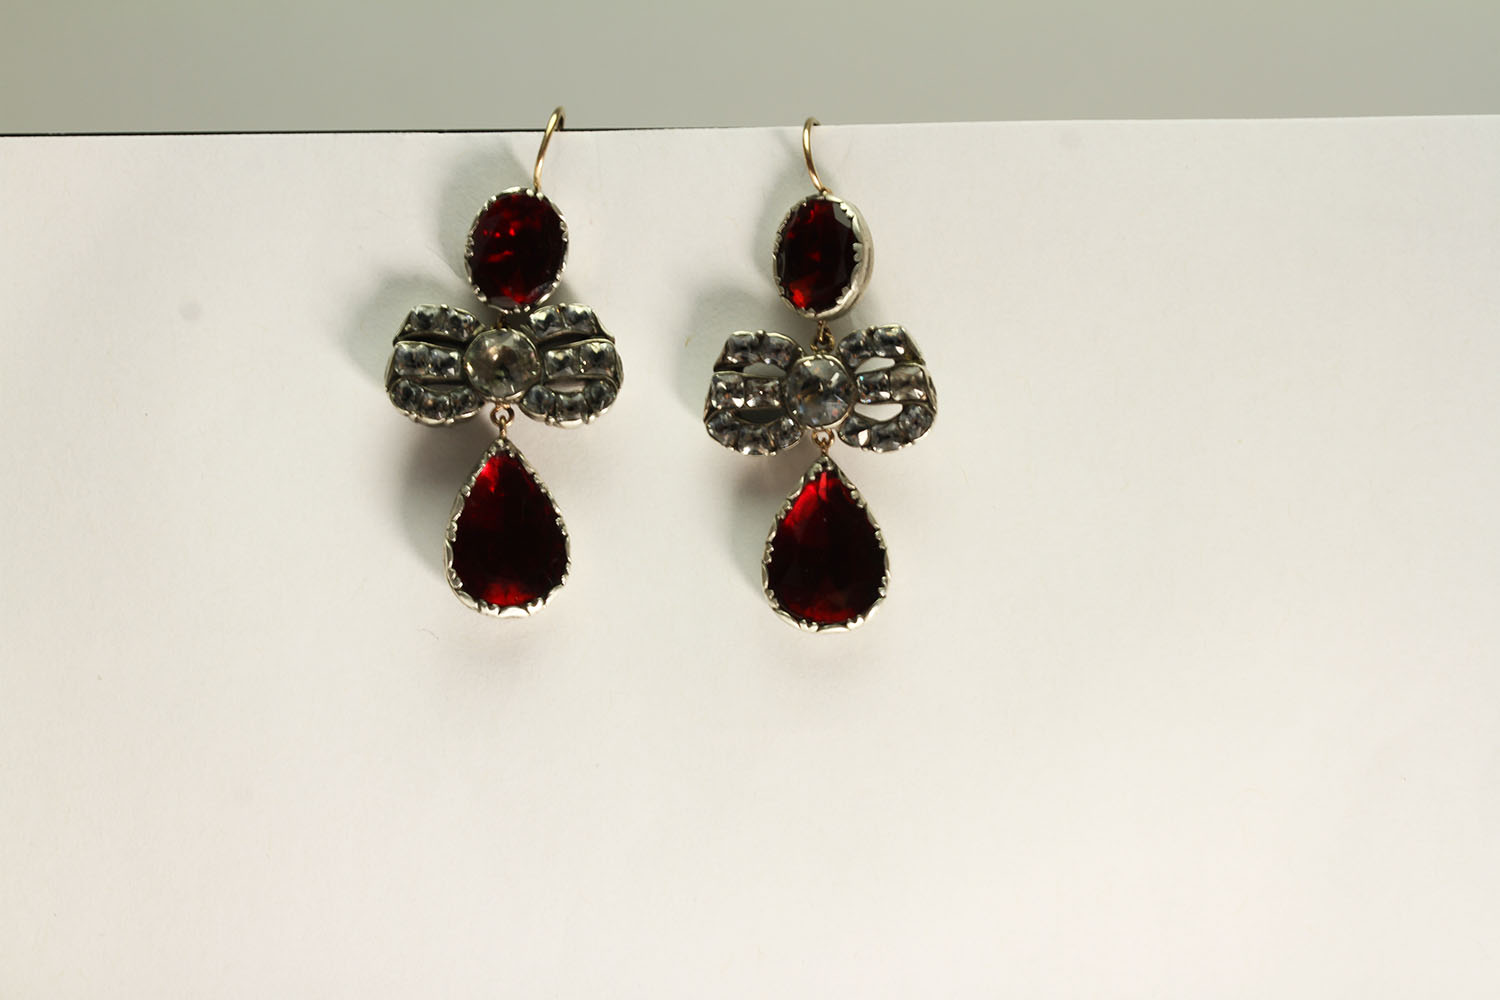 VICTORIAN OLD CUT GARNET AND PASTE DROP EARRINGS WITH FOILED BACK, dimensions 4x2 cms